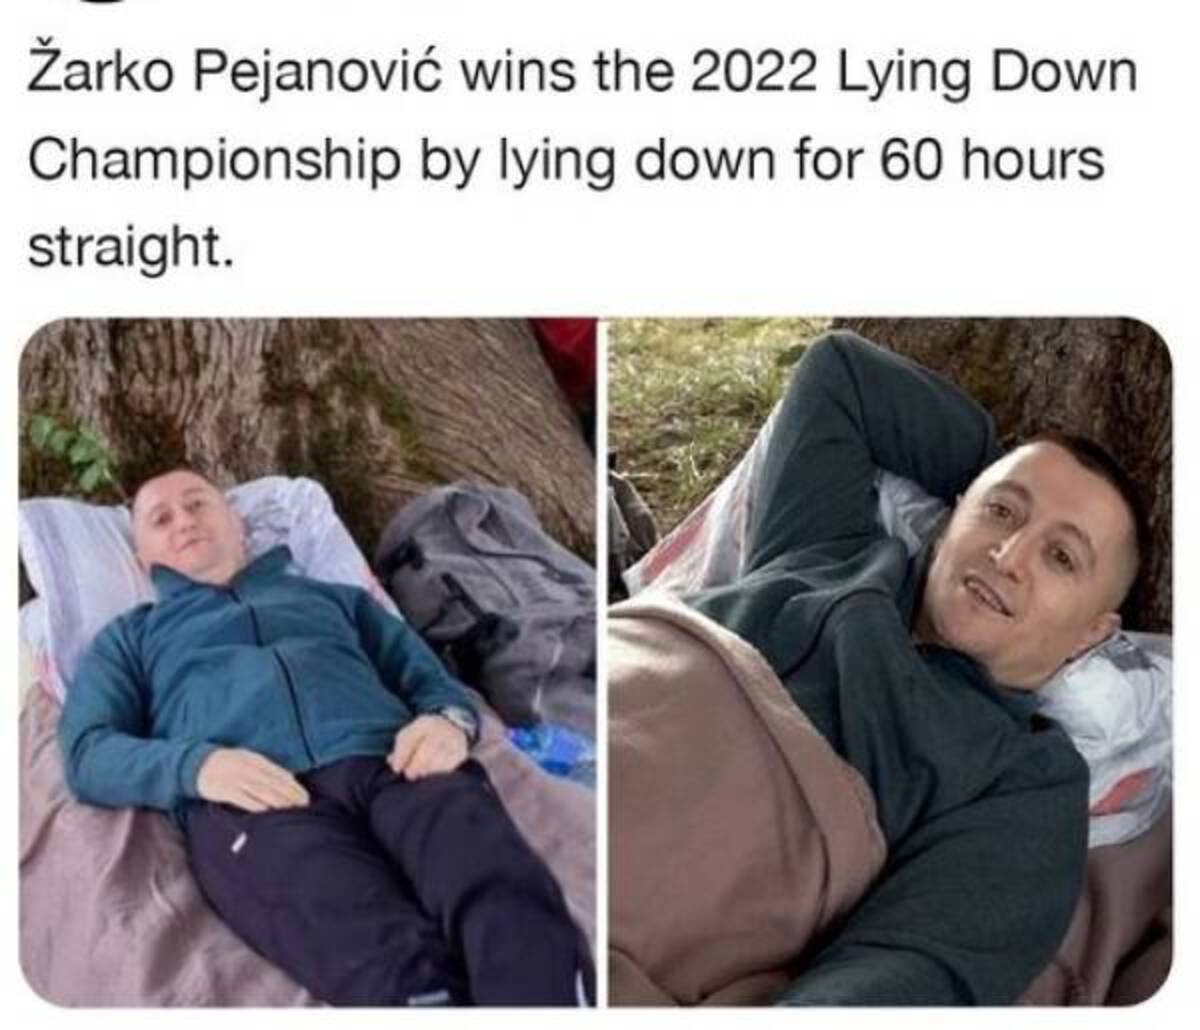 arko Pejanovi wins the 2022 Lying Down Championship by lying down for 60 hours straight.